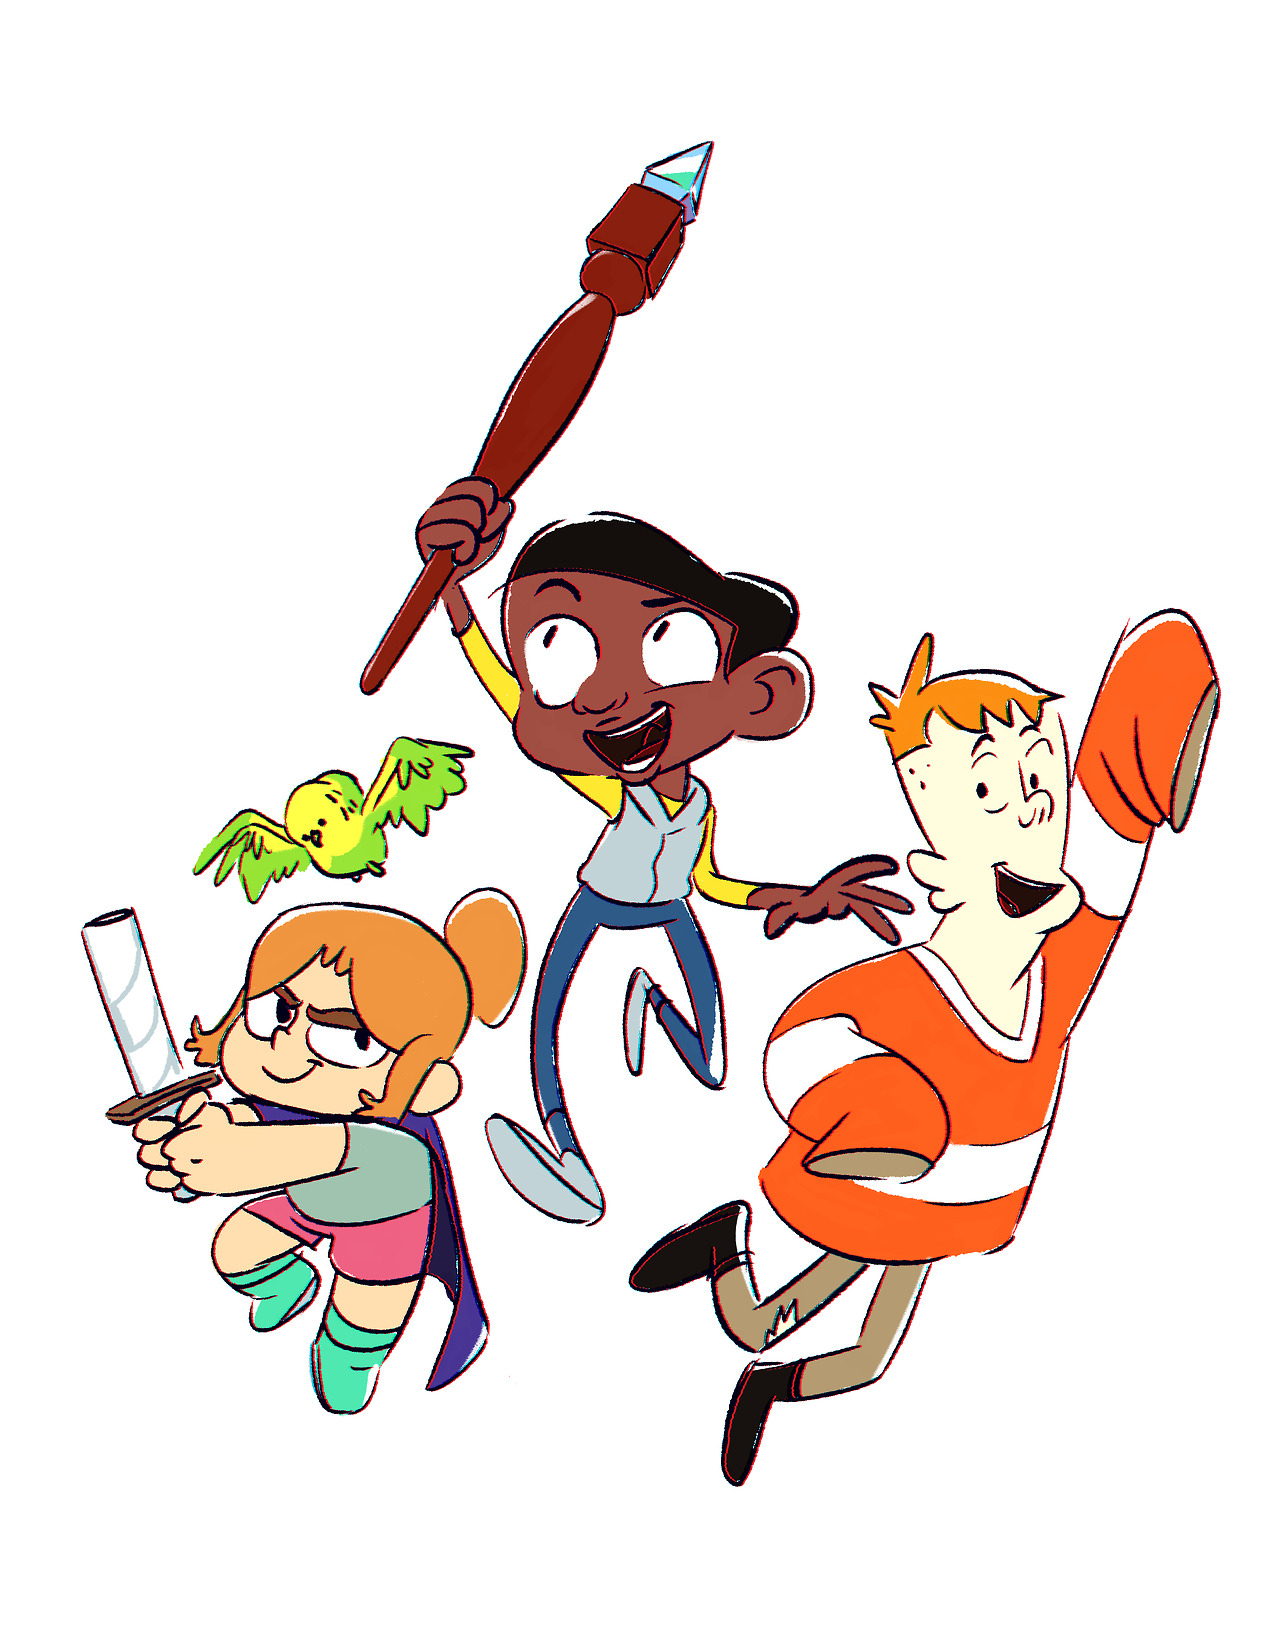 I freaking loved the pilot eposode of craig of the creek!!! Kinda reminded me of my own childhood when I lived in the country (tho i didnt have any frends there so i was just wondering through the...